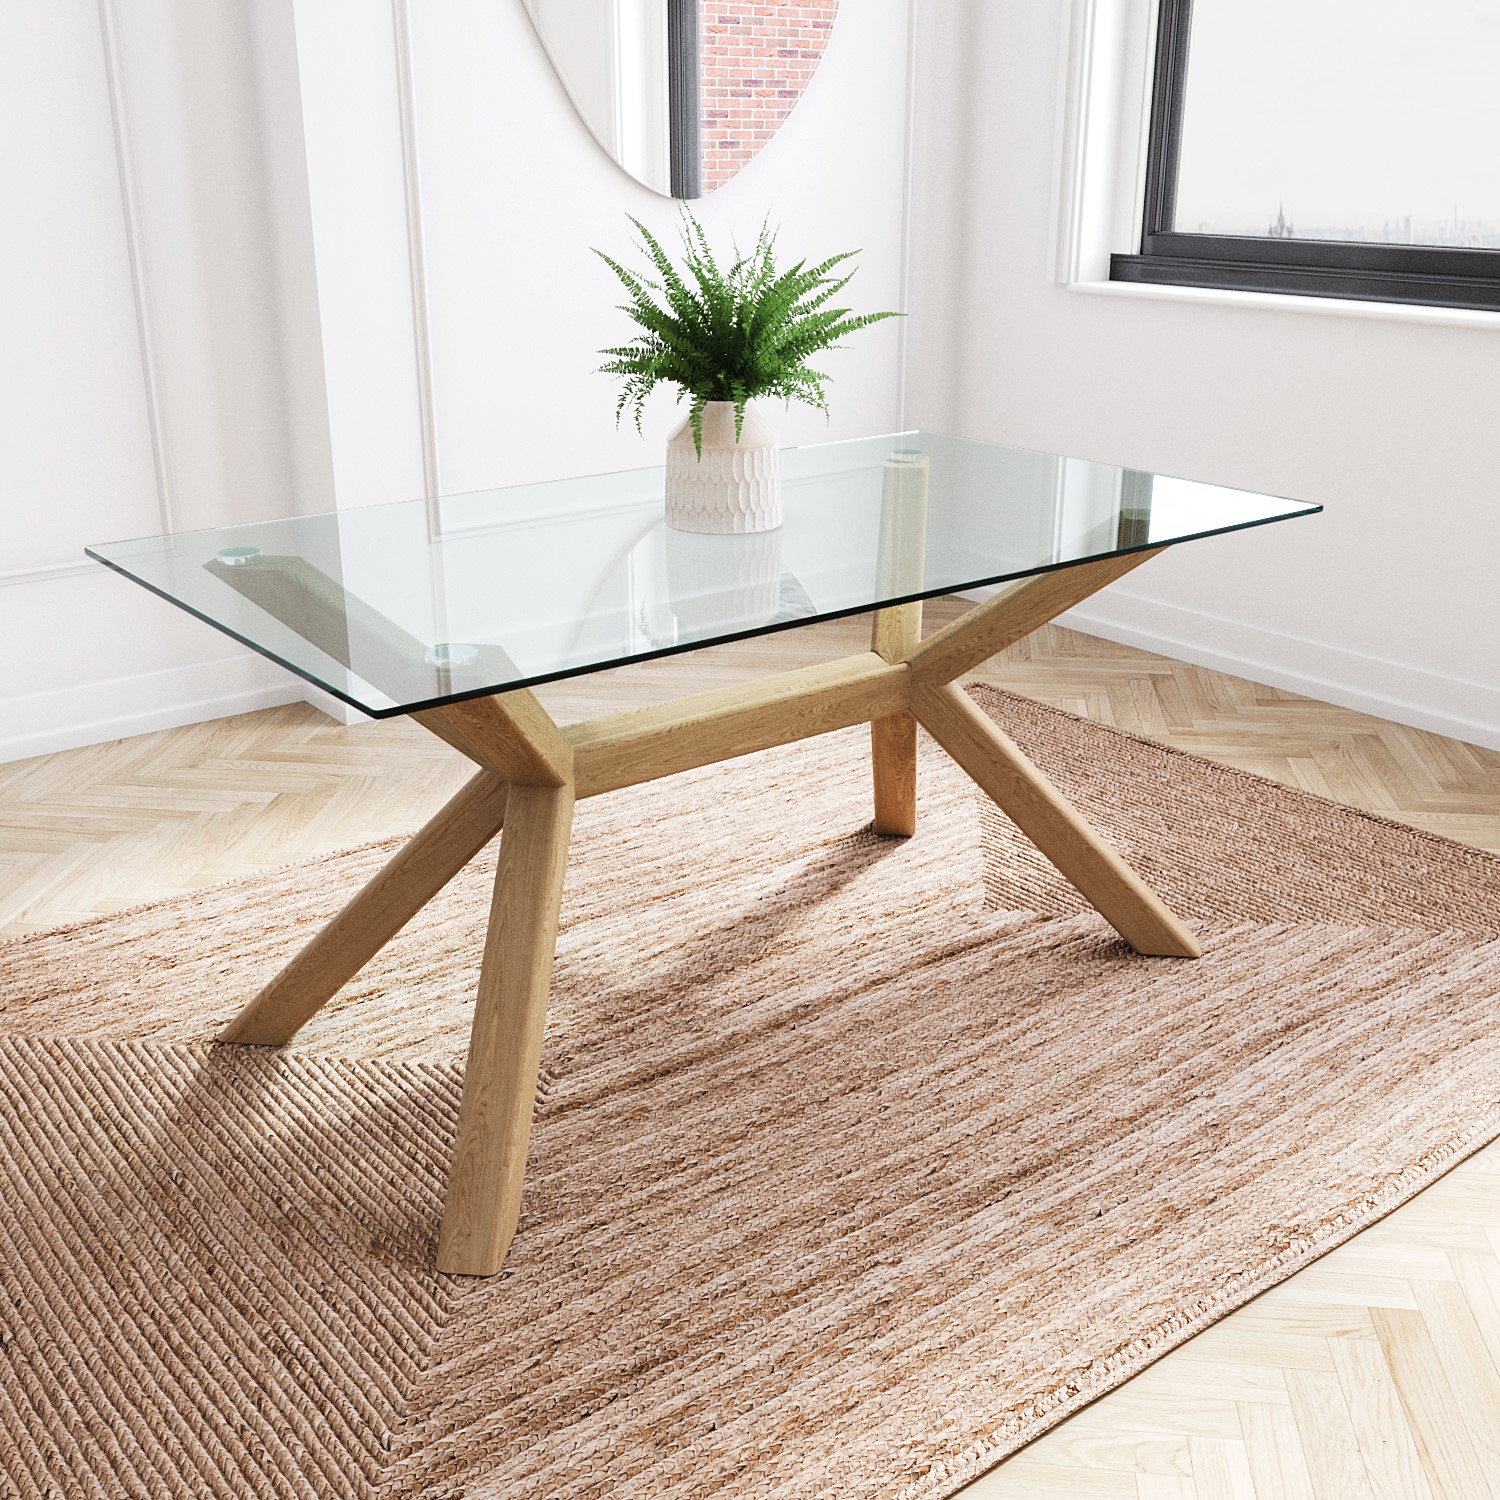 Photo of Large rectangle glass top dining table with solid oak legs - nori